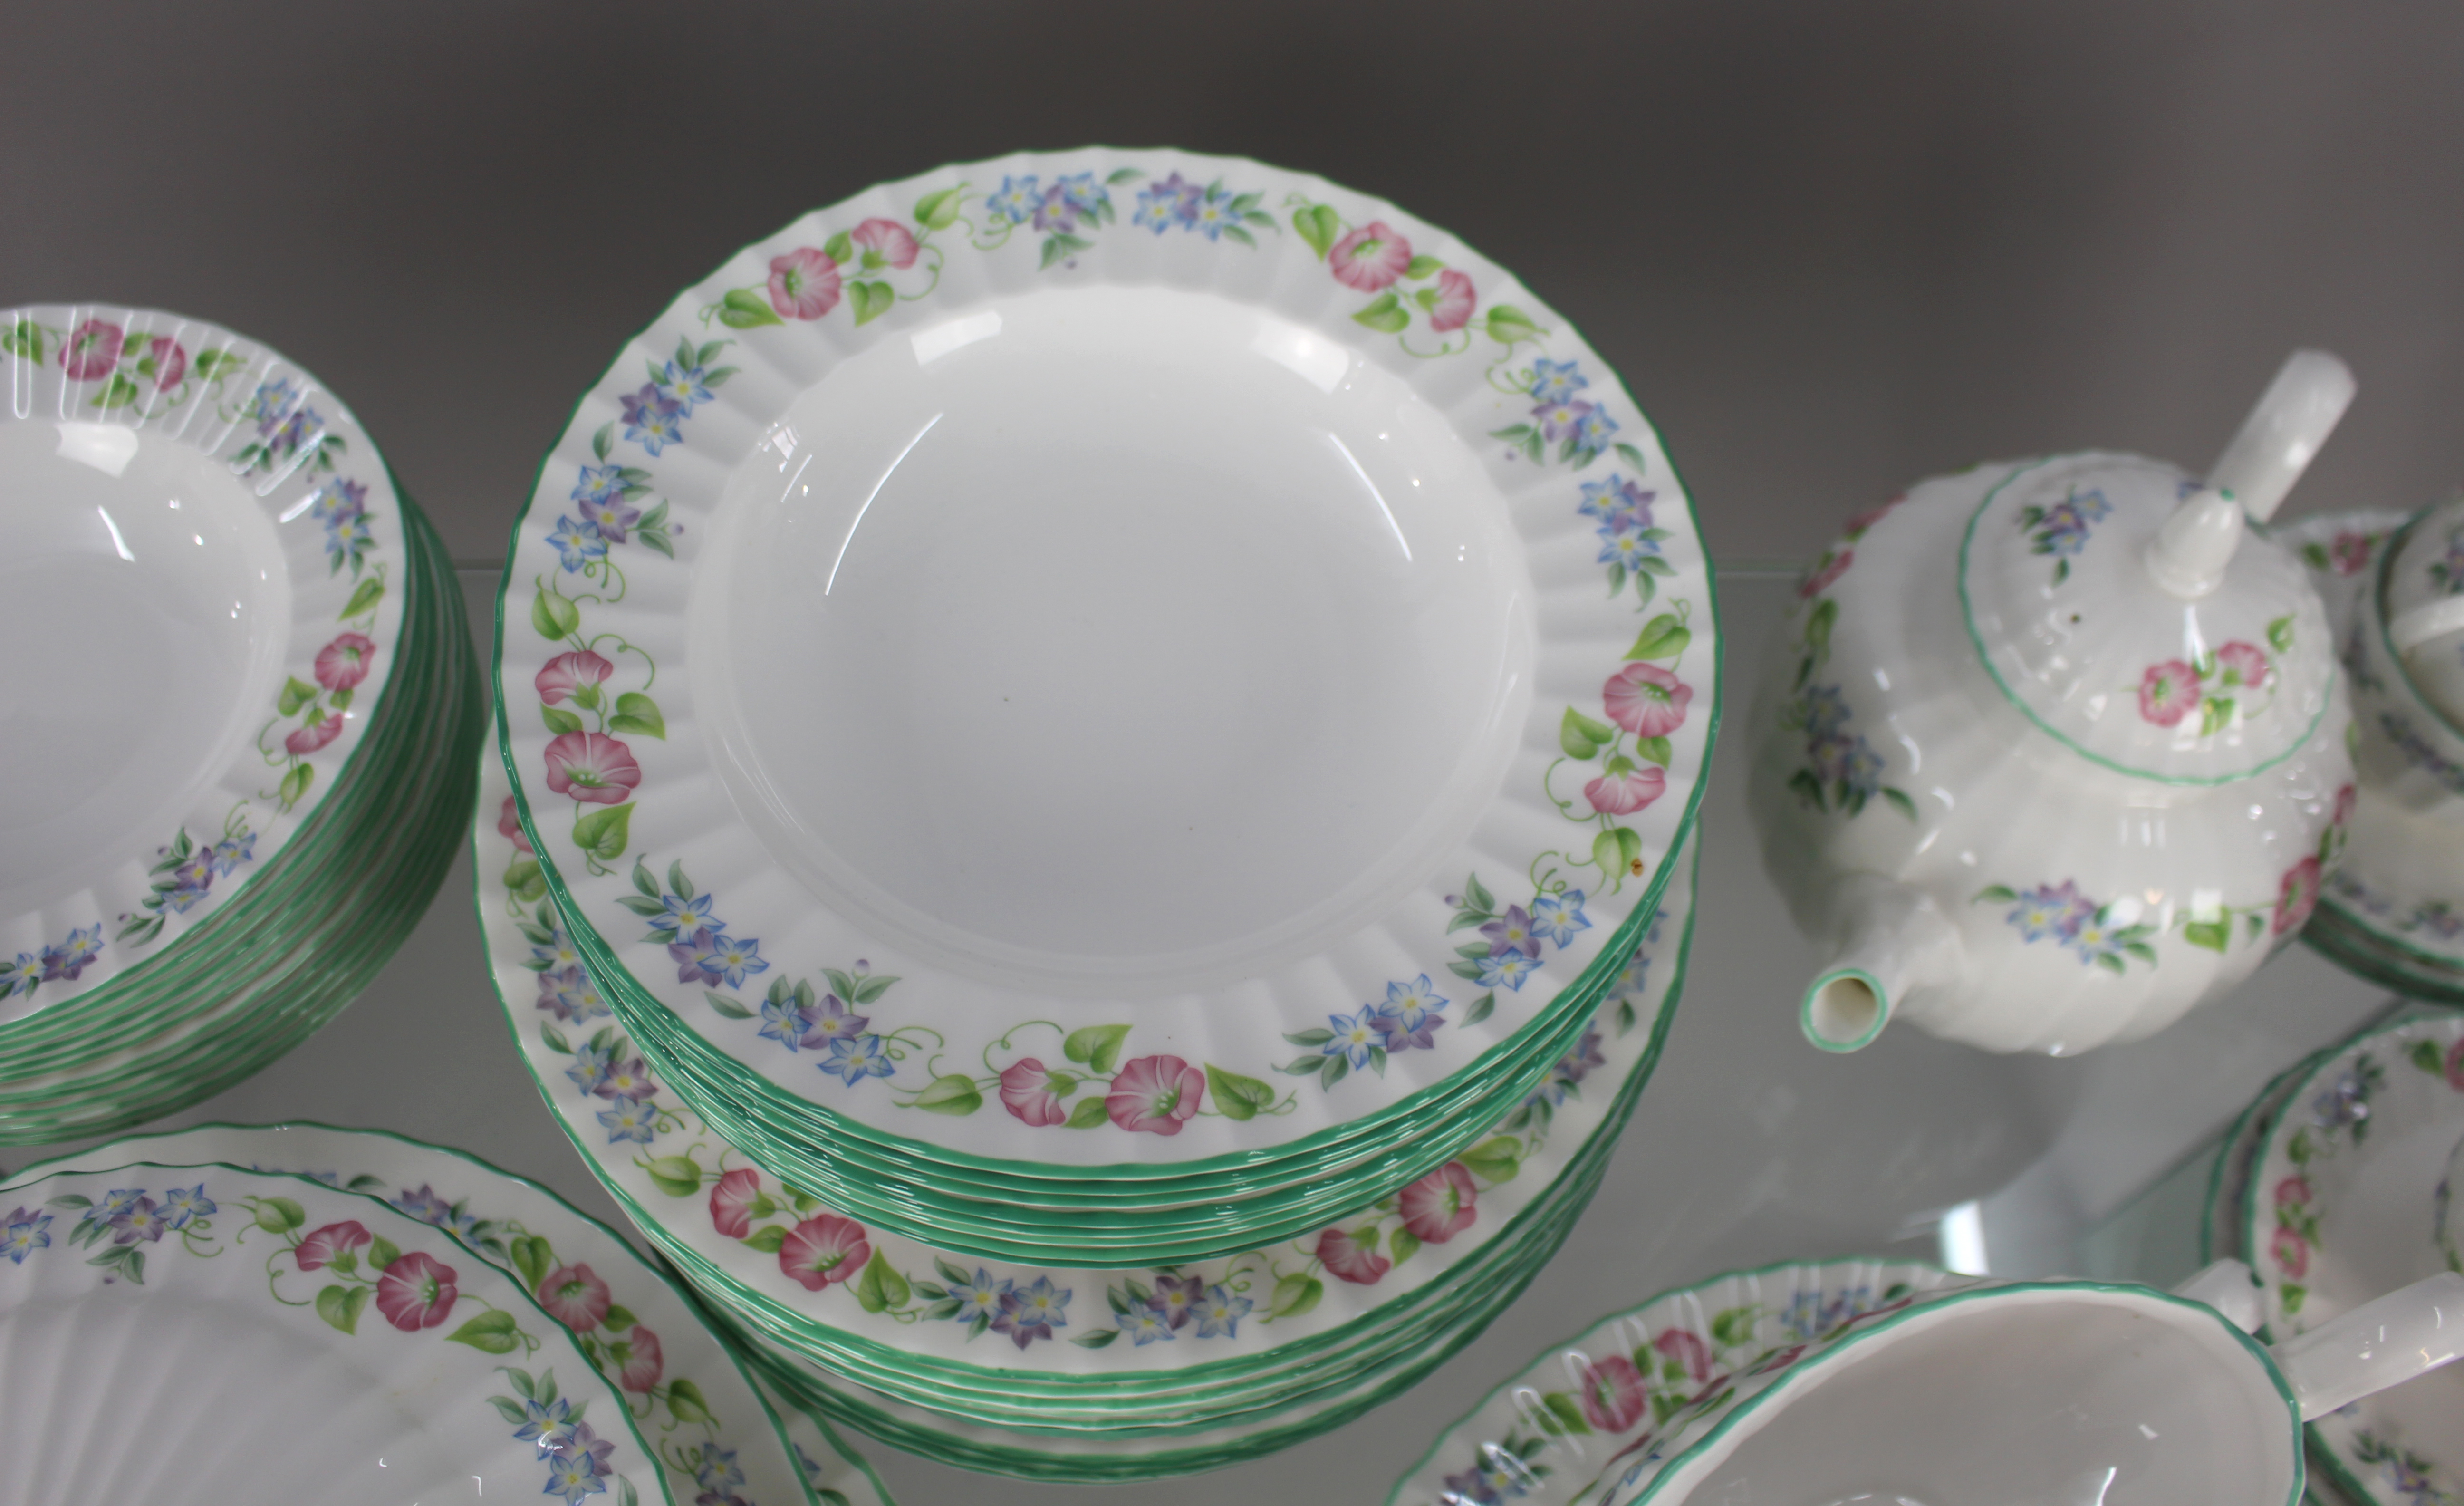 Royal Worcester English Garden 12 Place Dinner Service - Image 9 of 9